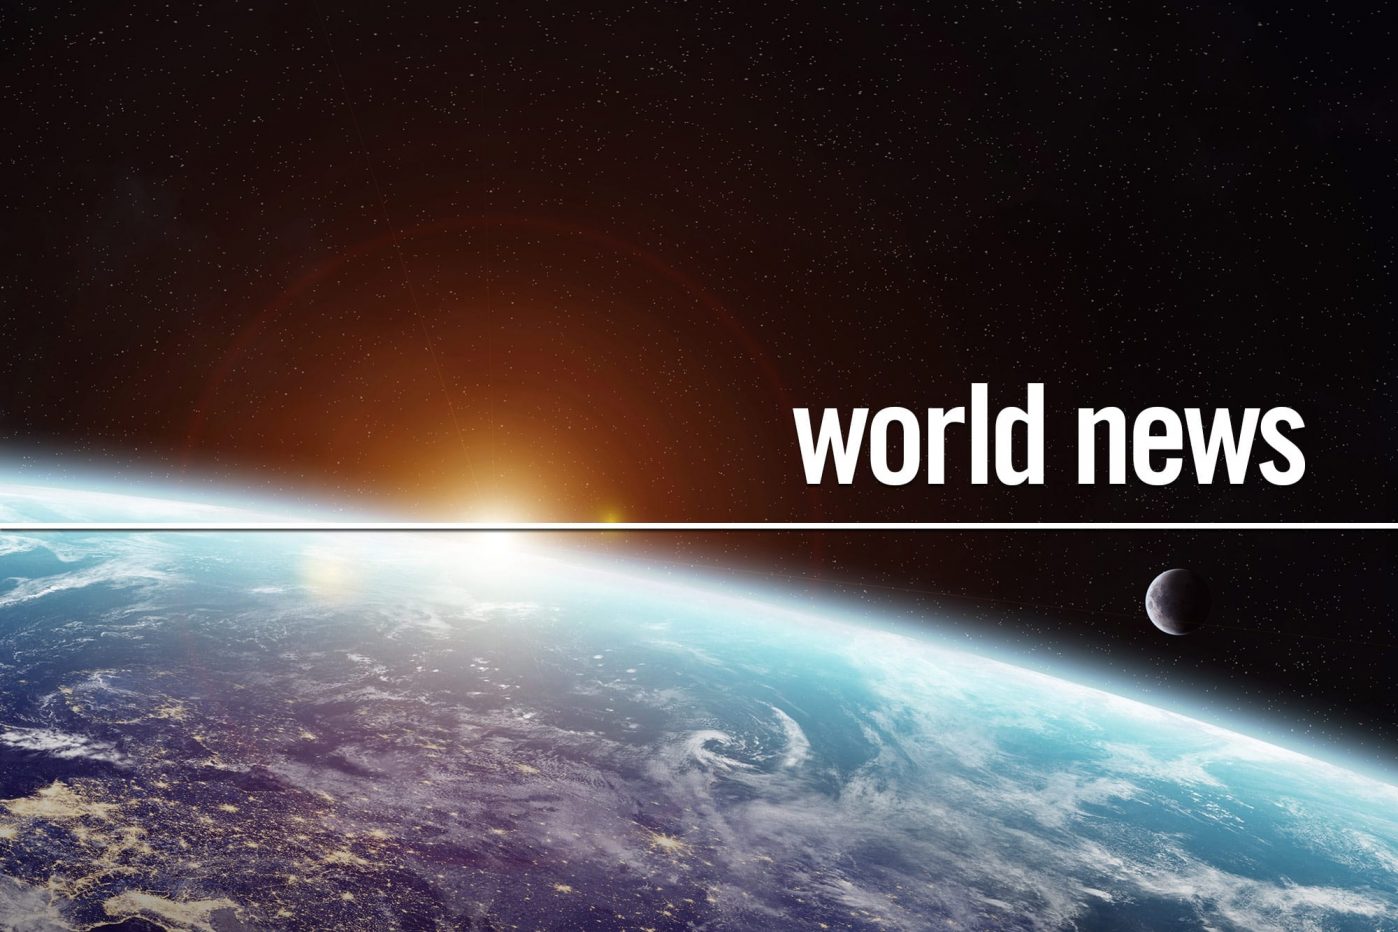 World news today in English - inc Syria news live and Russia news 24/7 - A global outlook optimised for your browsing by WTX News